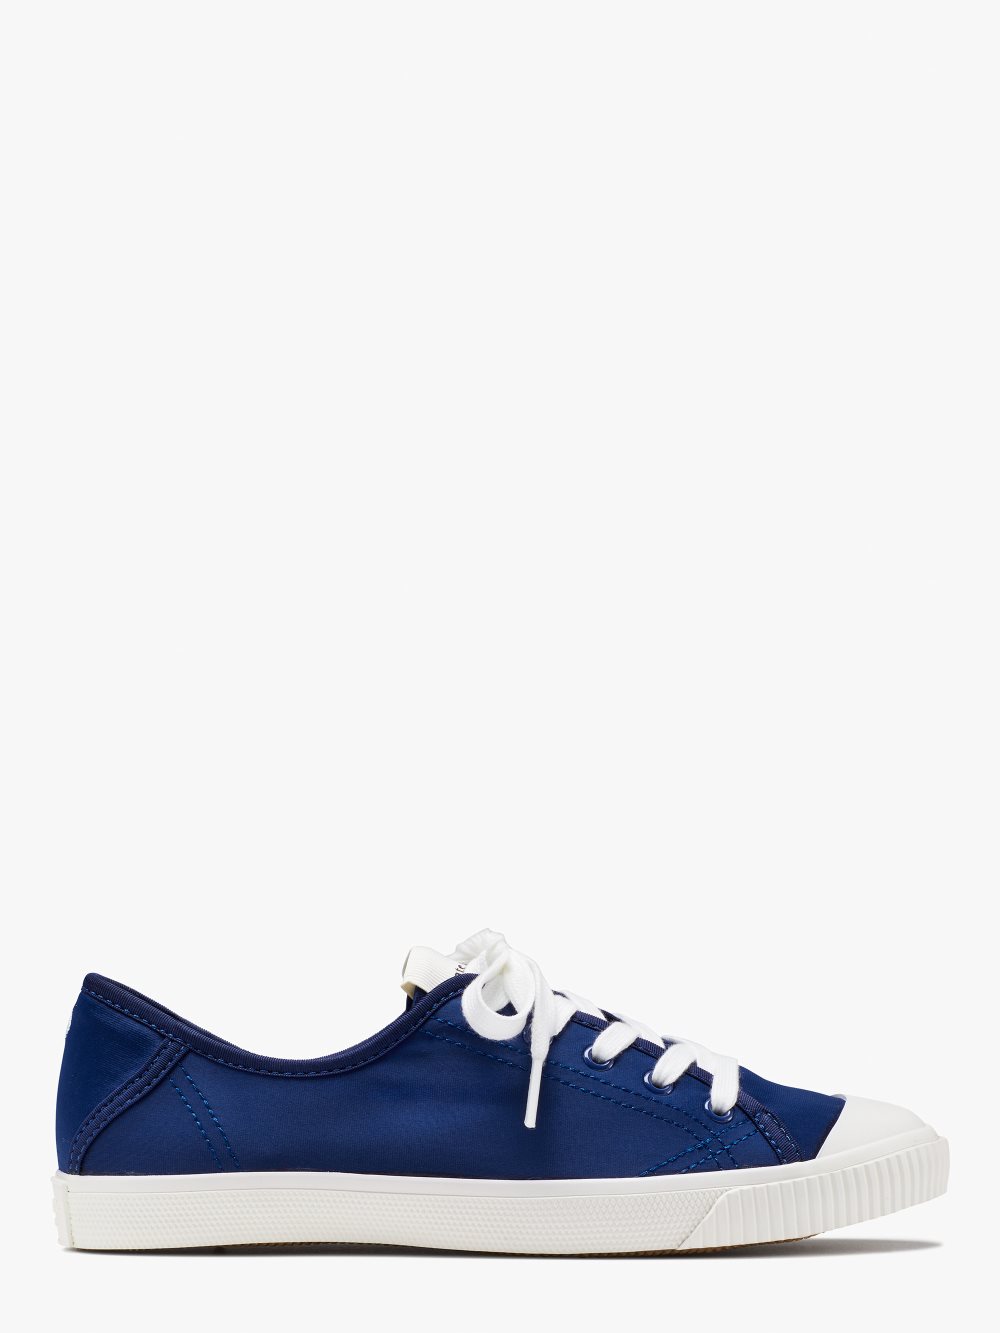 Women's outerspace tennison sneakers | Kate Spade